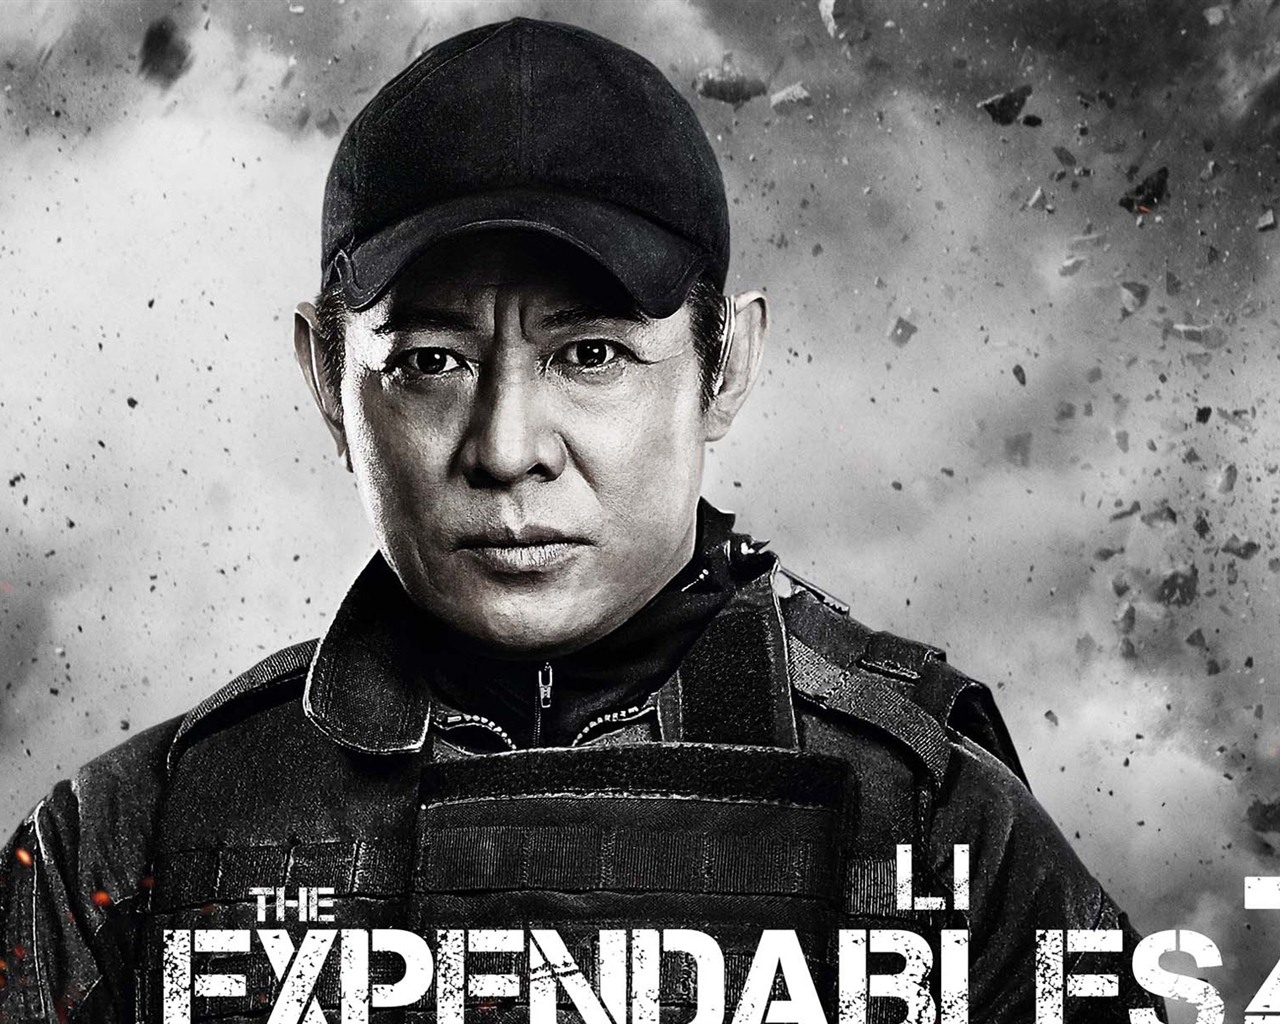 2012 The Expendables 2 HD wallpapers #16 - 1280x1024